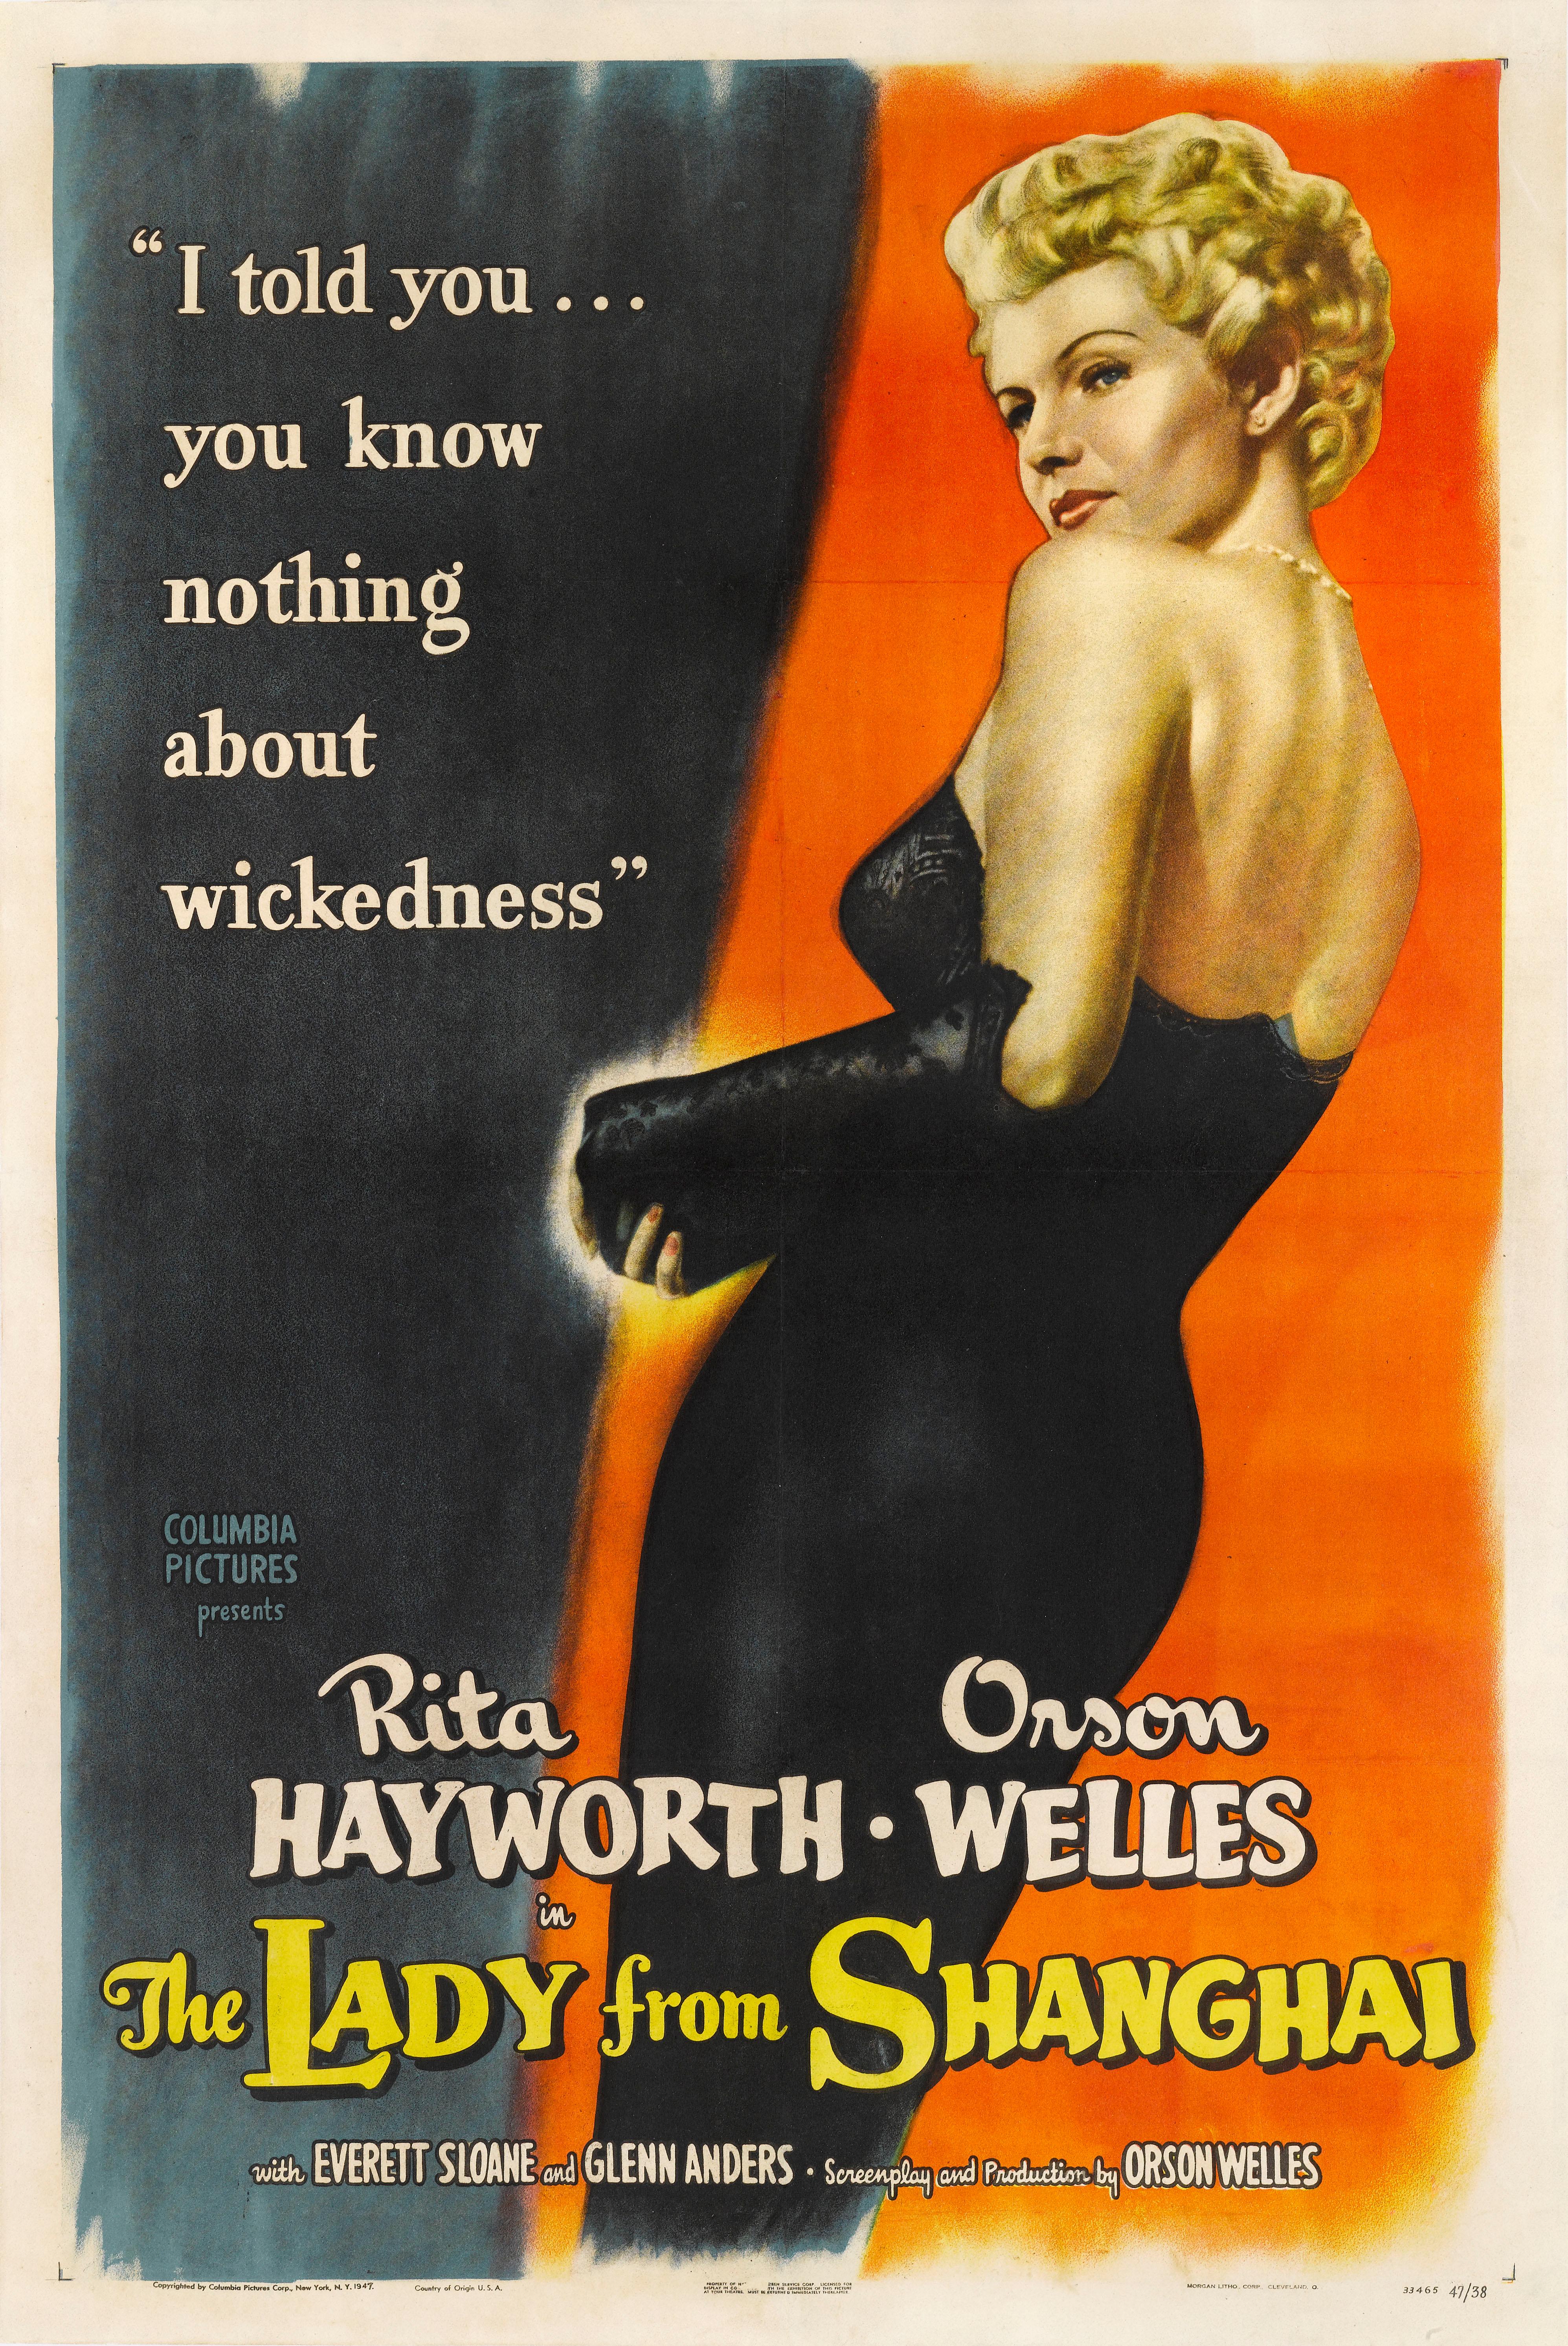 Original US film poster.
This is one of the most sought after American film noir posters. During this golden age of filmmaking, taglines were prominent in many American film posters. The Lady from Shanghai has one of the most alluring taglines - 'I